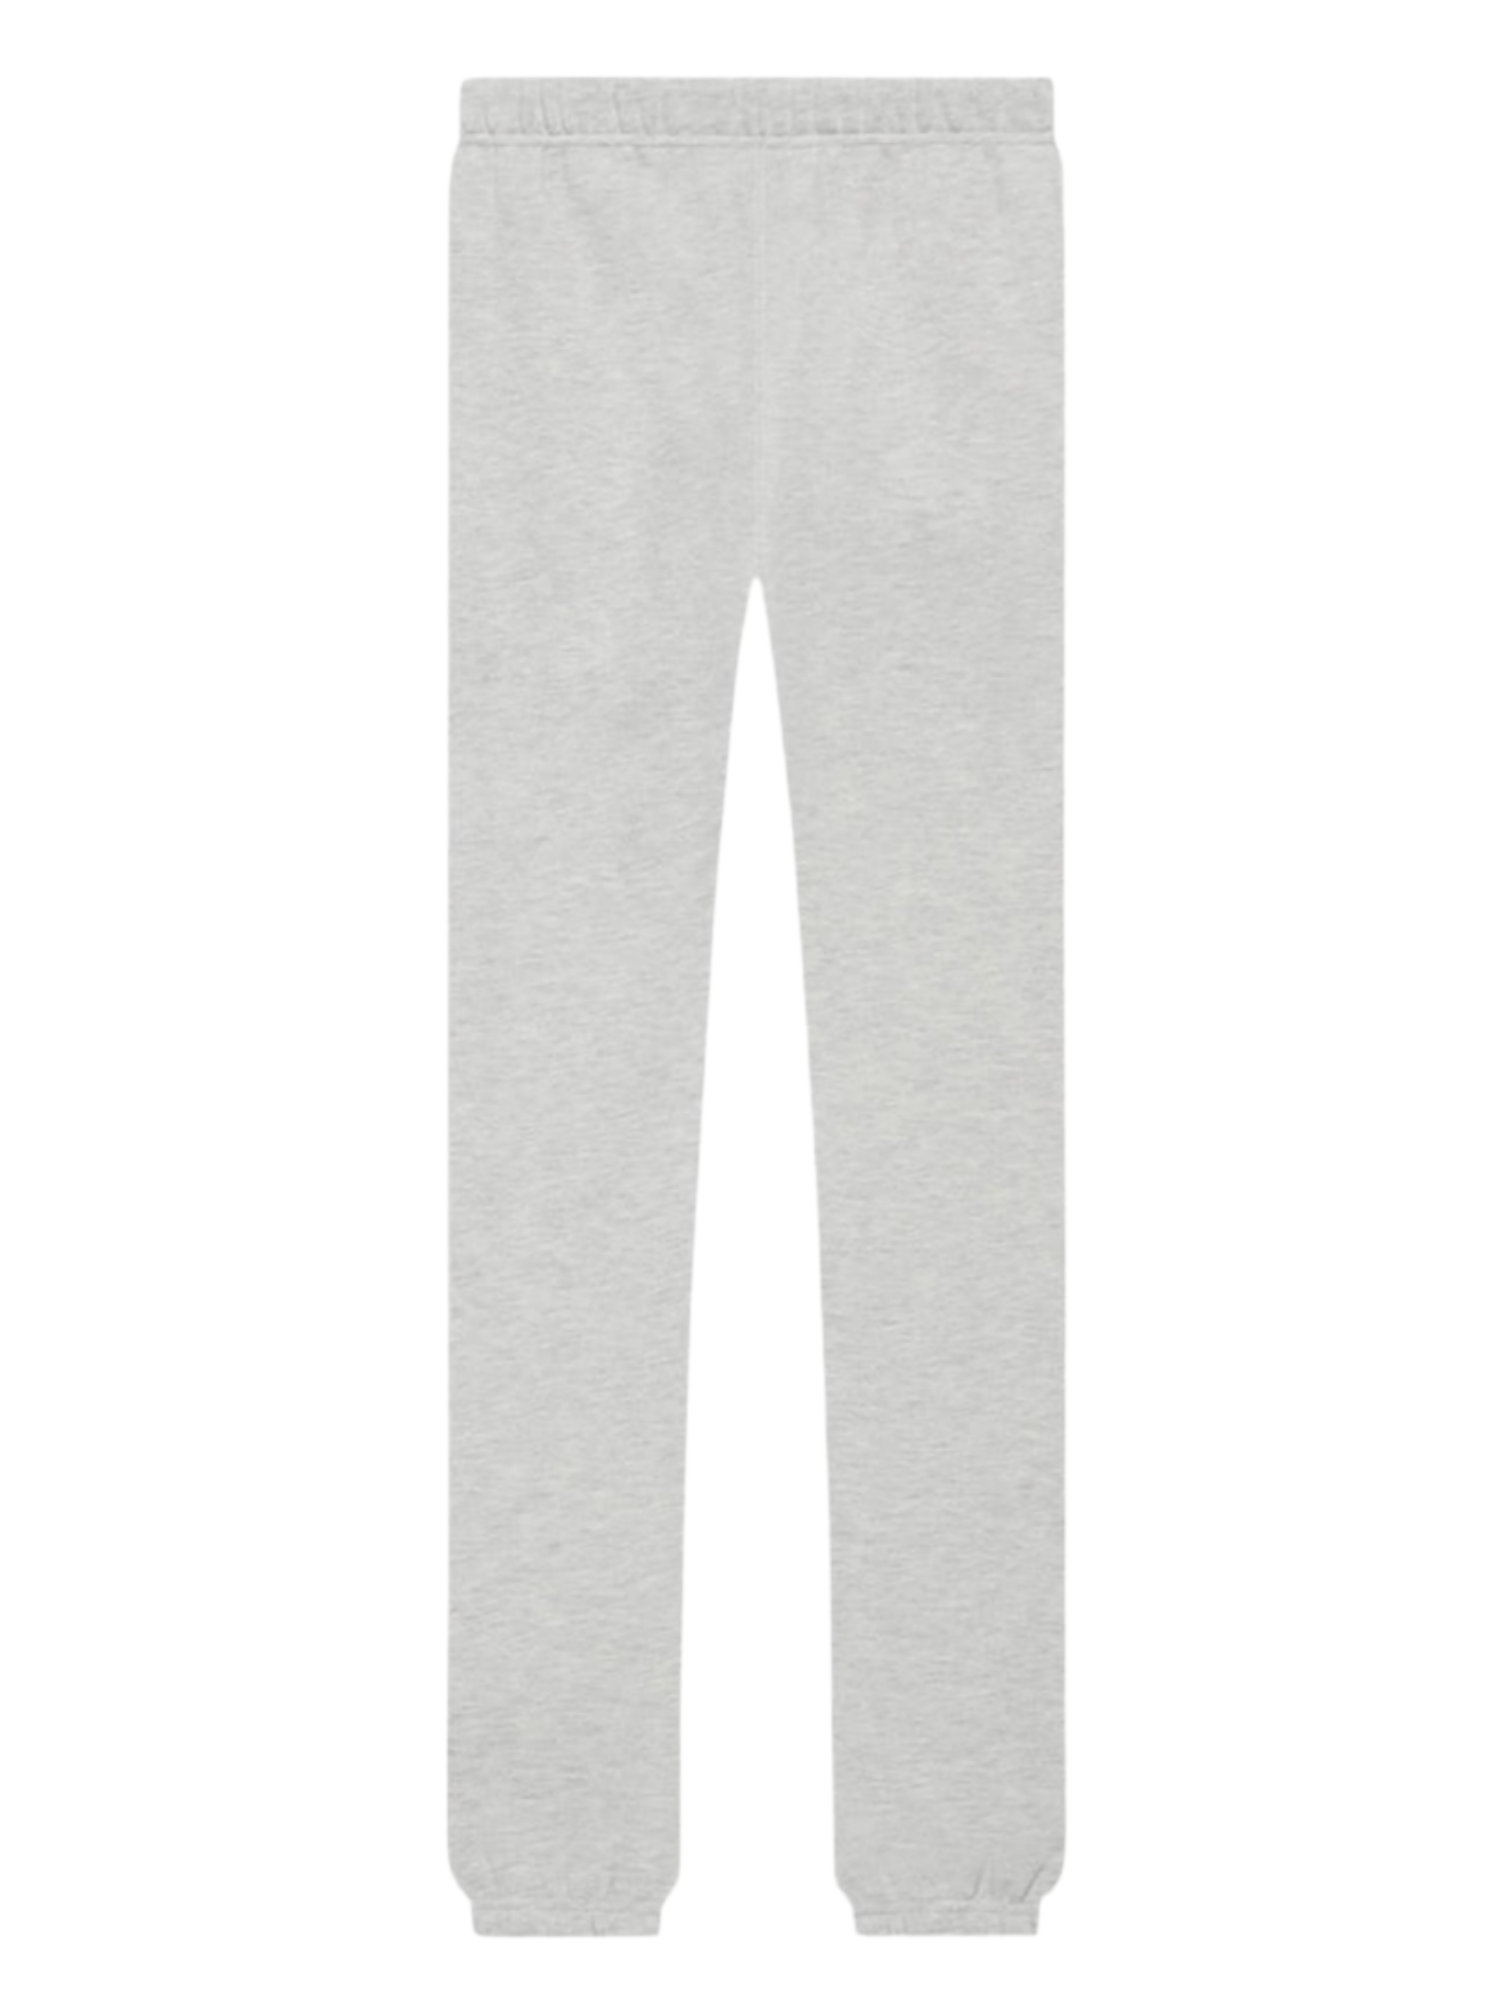 Essentials Fear of God Light Heather Oatmeal Fleece Sweatpants SS22 — Genuine Design Luxury Consignment Calgary, Alberta, Canada New & Pre-Owned Clothing, Shoes, Accessories.